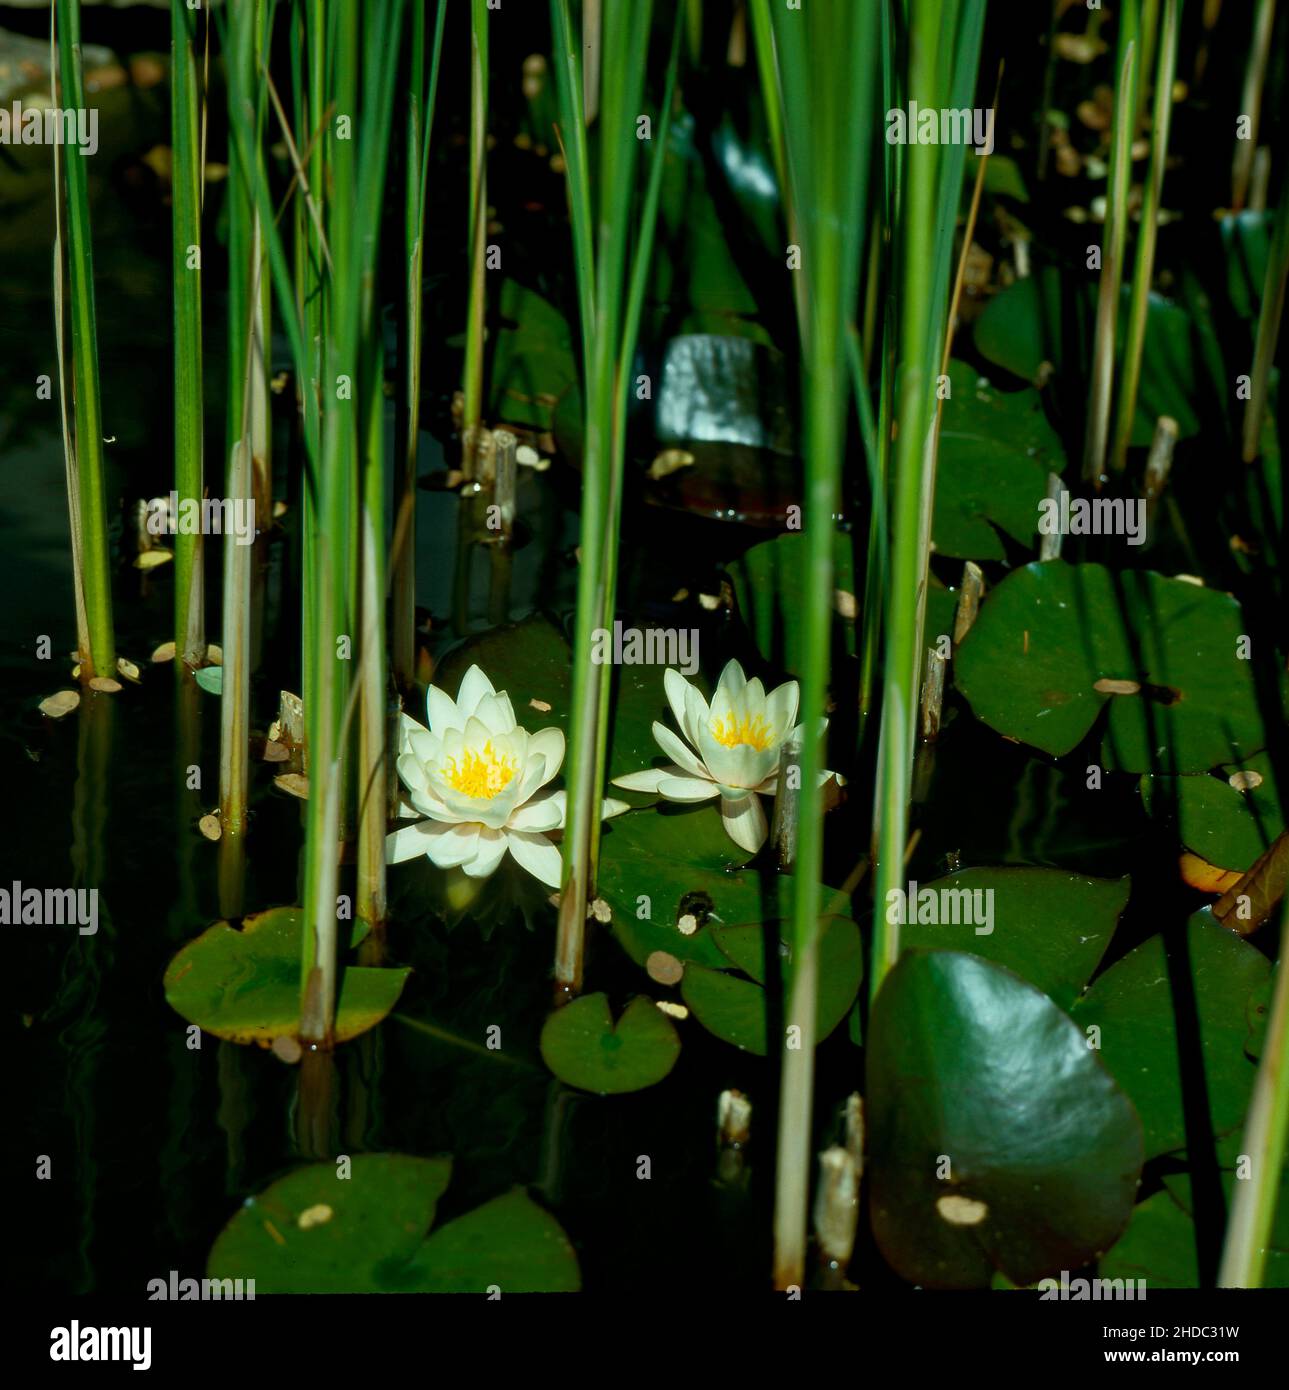 Garden pond with white water lily (Nymphaea) and reed stalks Stock Photo